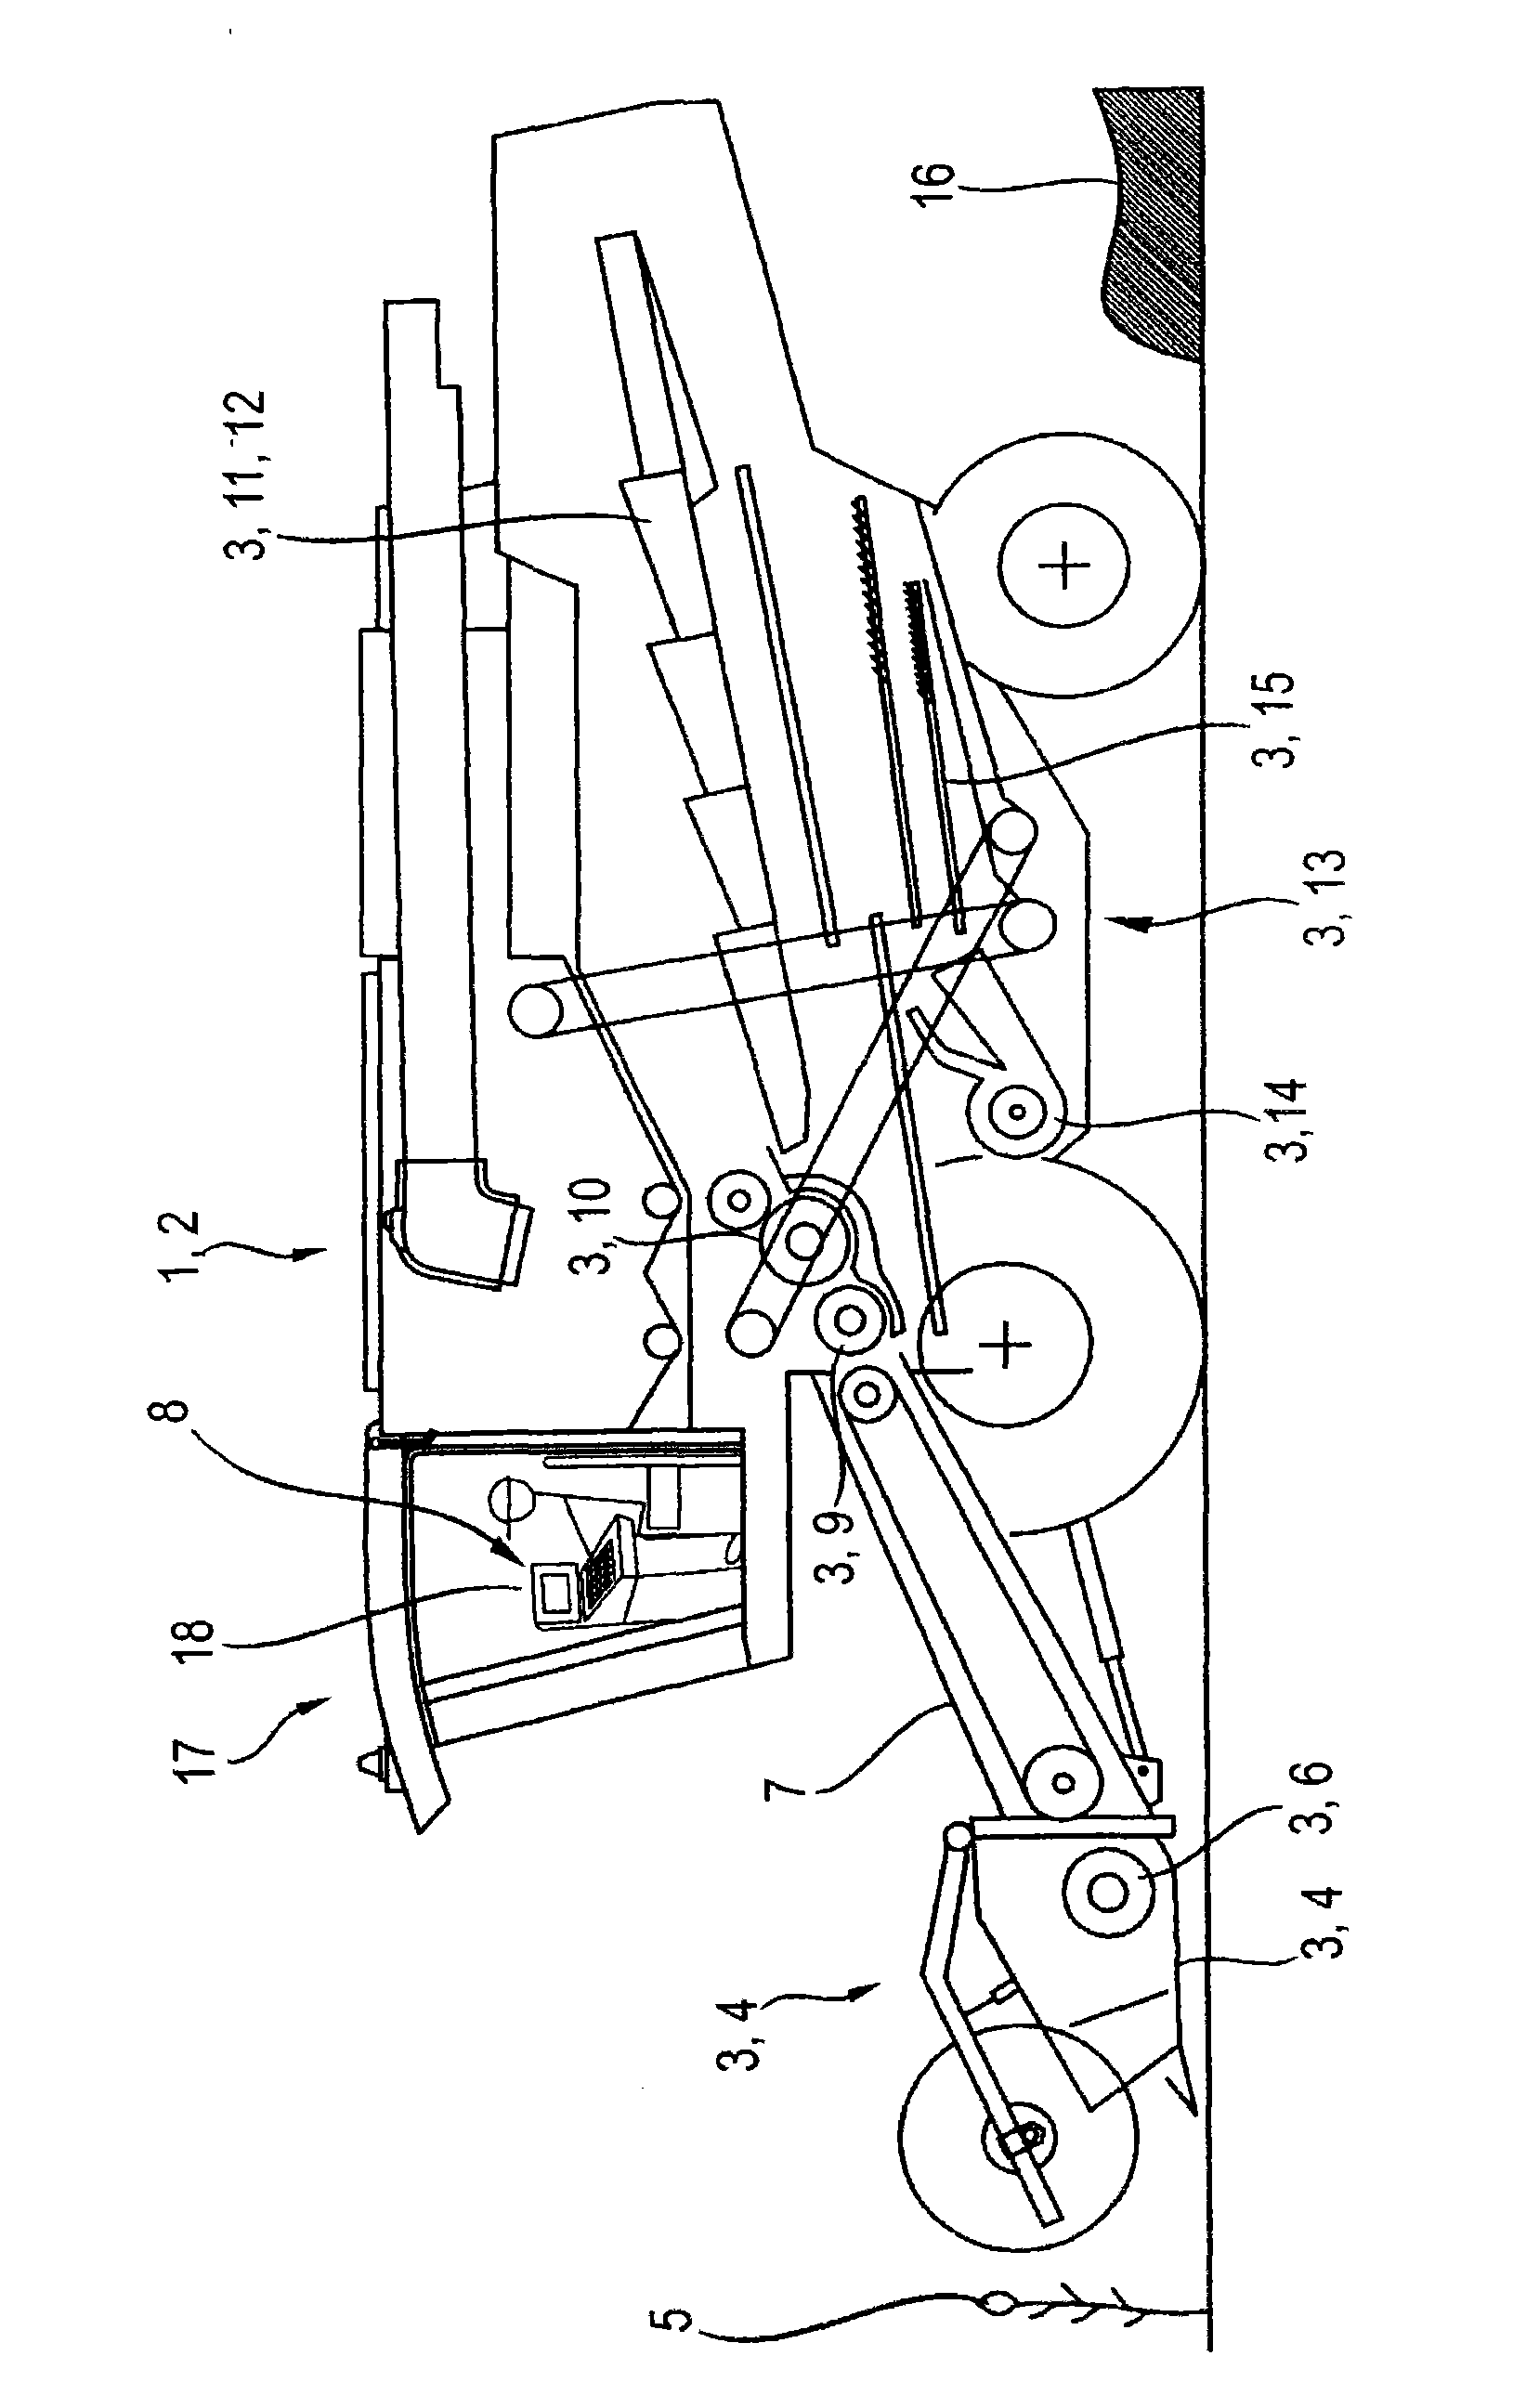 Display device for agricultural machines